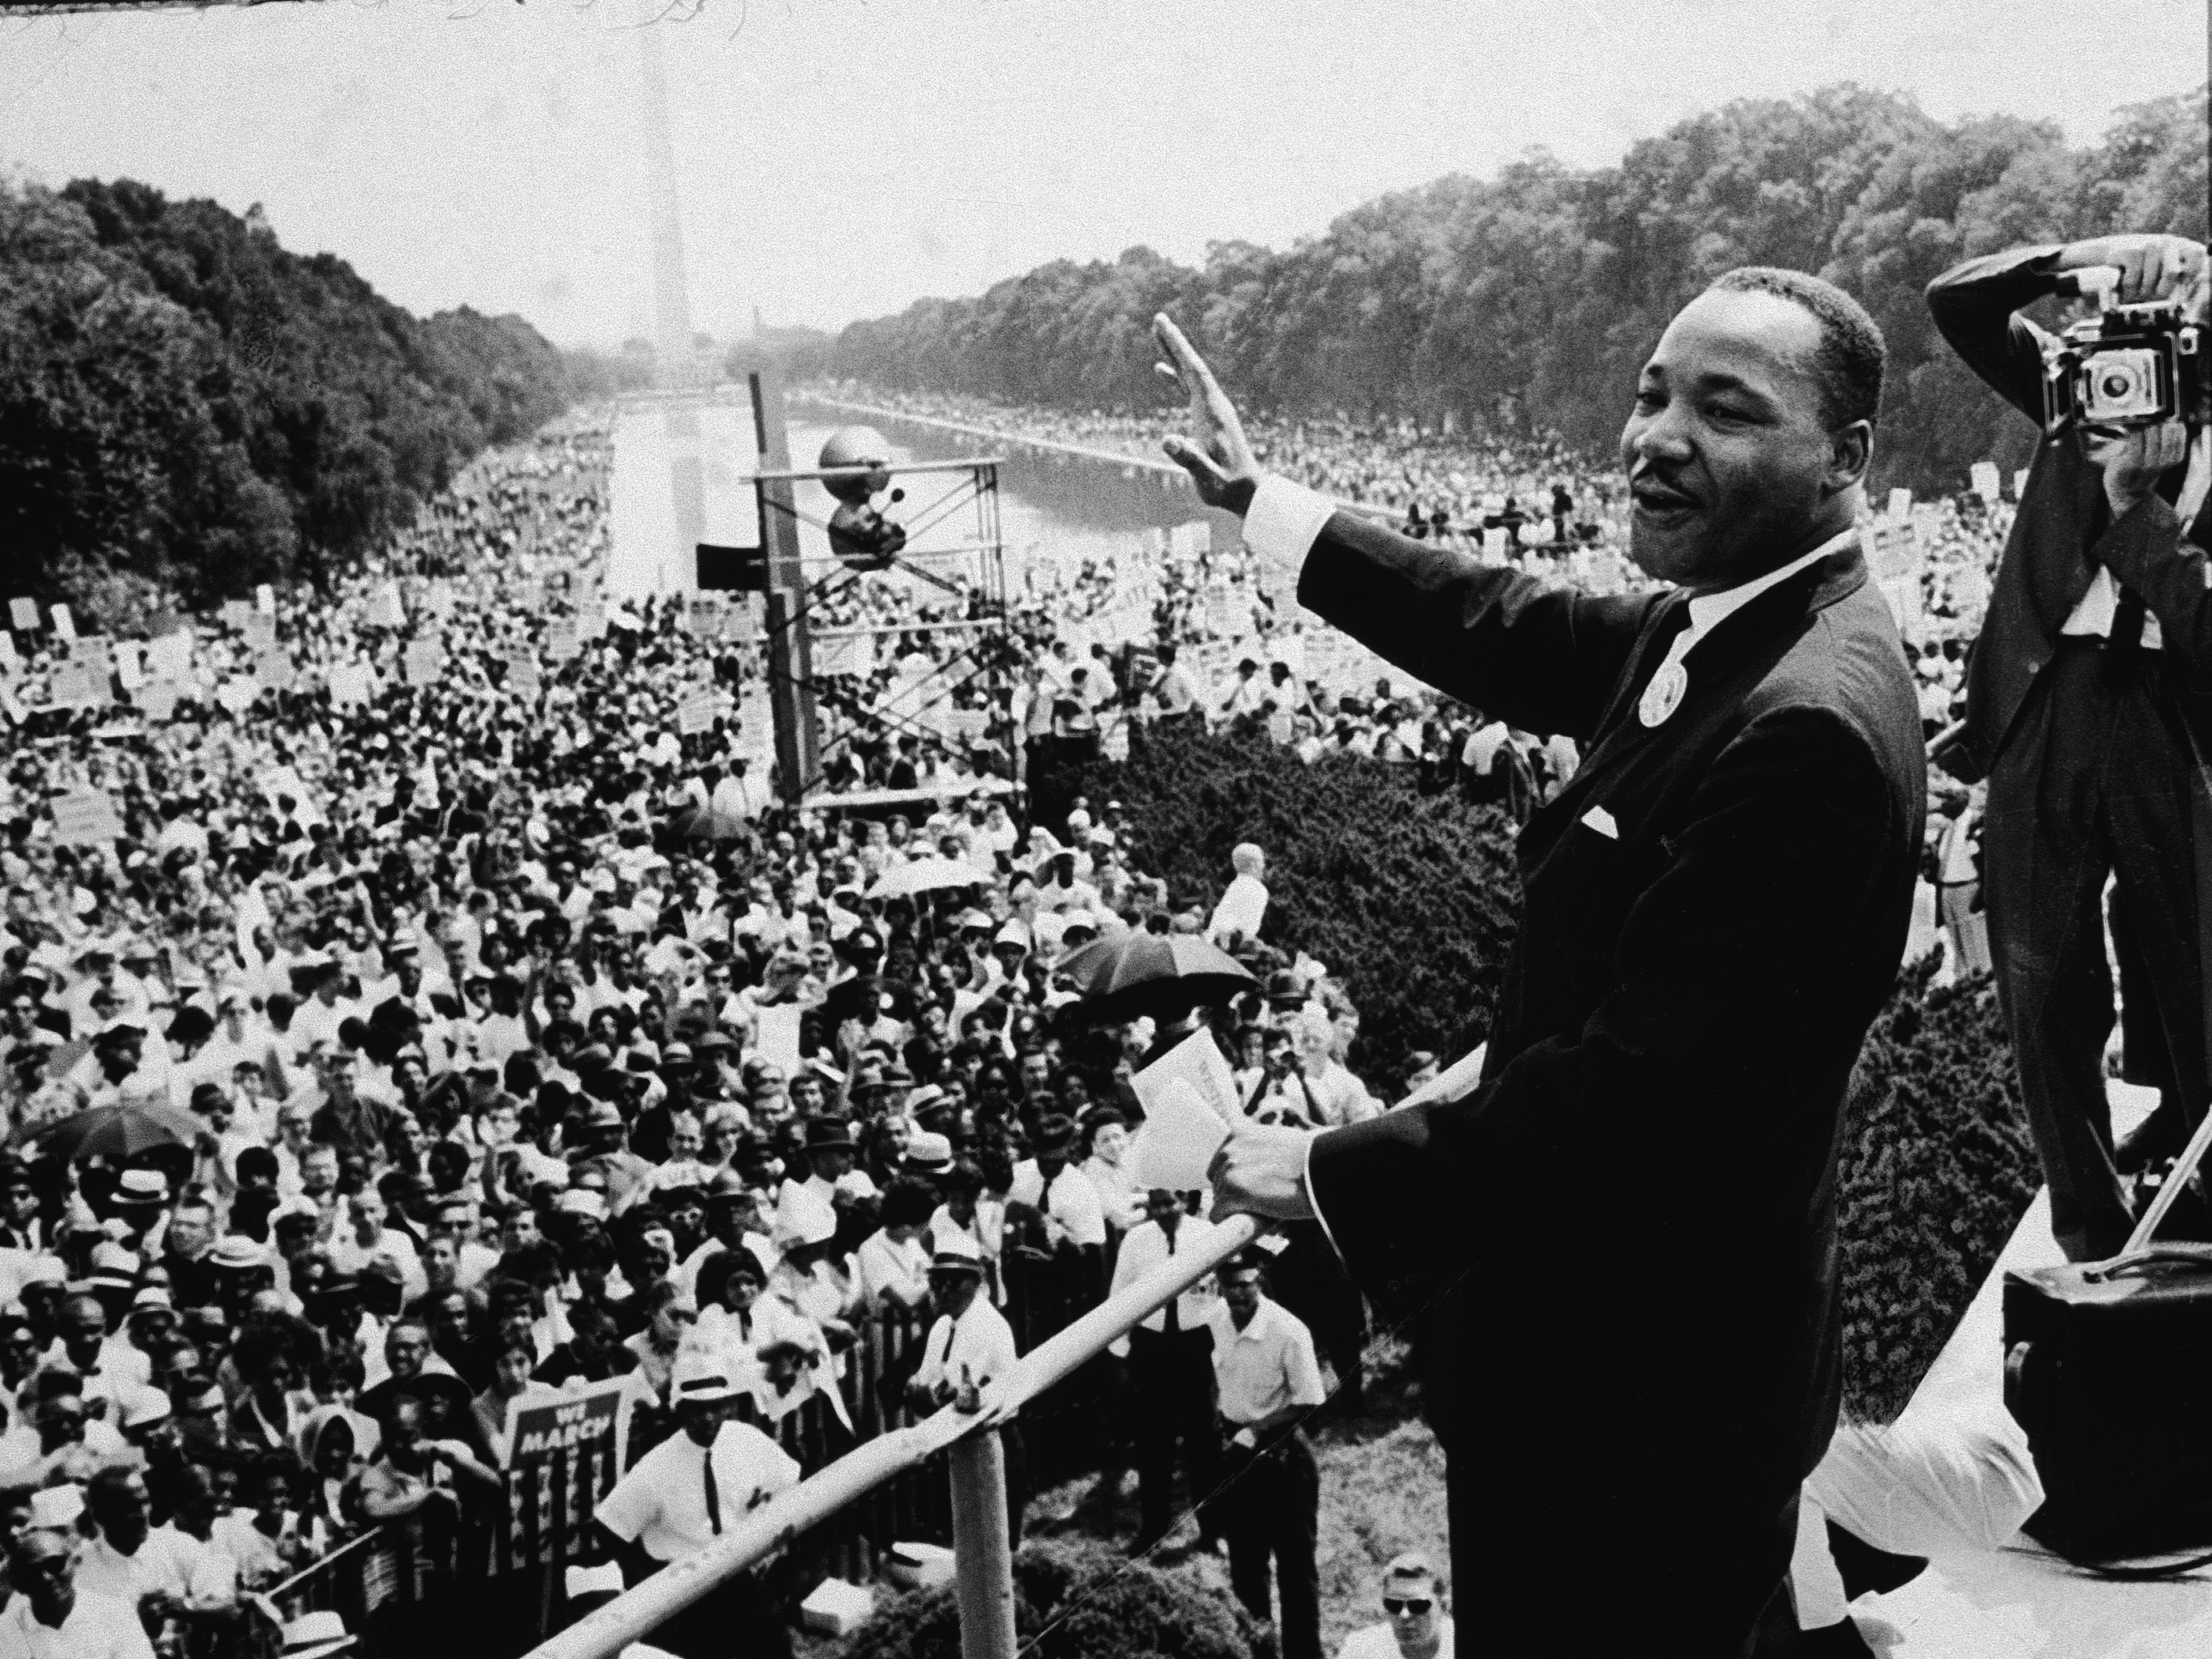 Martin Luther King Jr. addresses the crowd at the March On Washington D.C., on Aug. 28, 1963. CREDIT: CNP/Getty Images